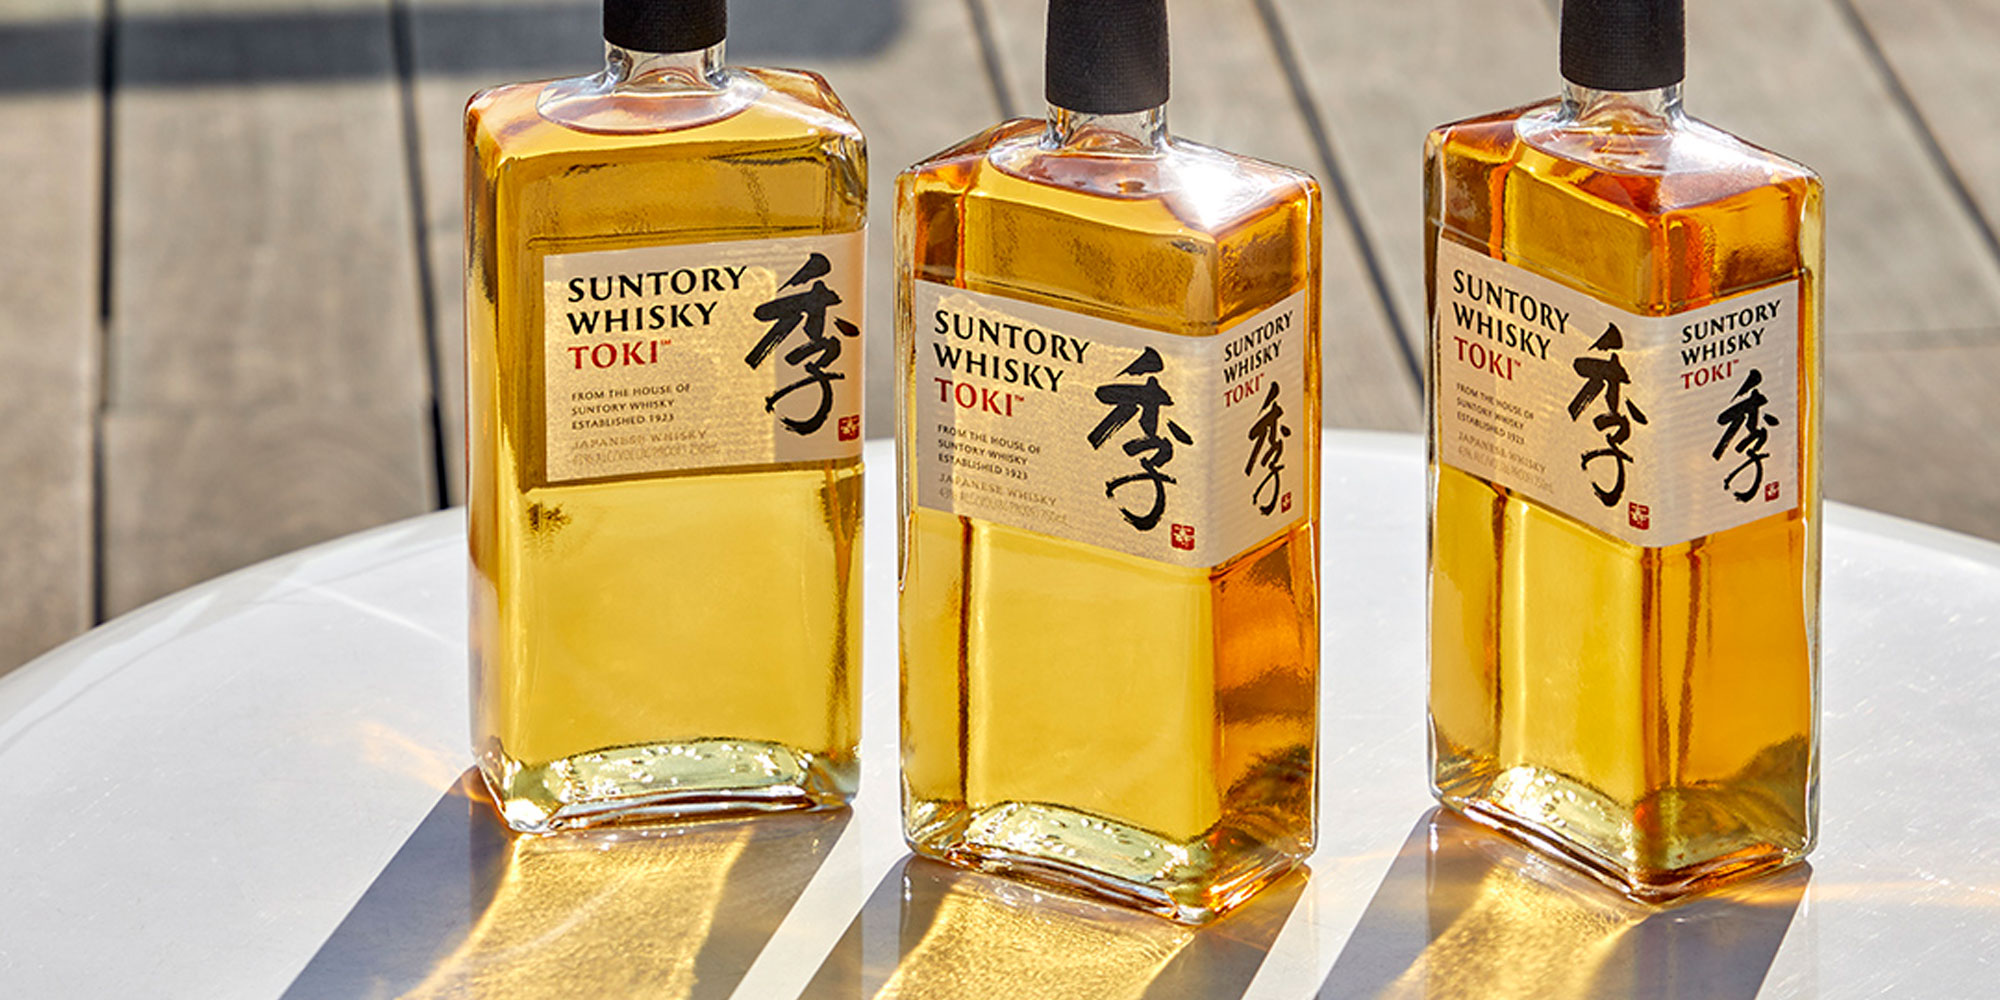 Mode-Design Toki® Whisky Blends the Best | Japanese World the Modernity Old of VinePair With